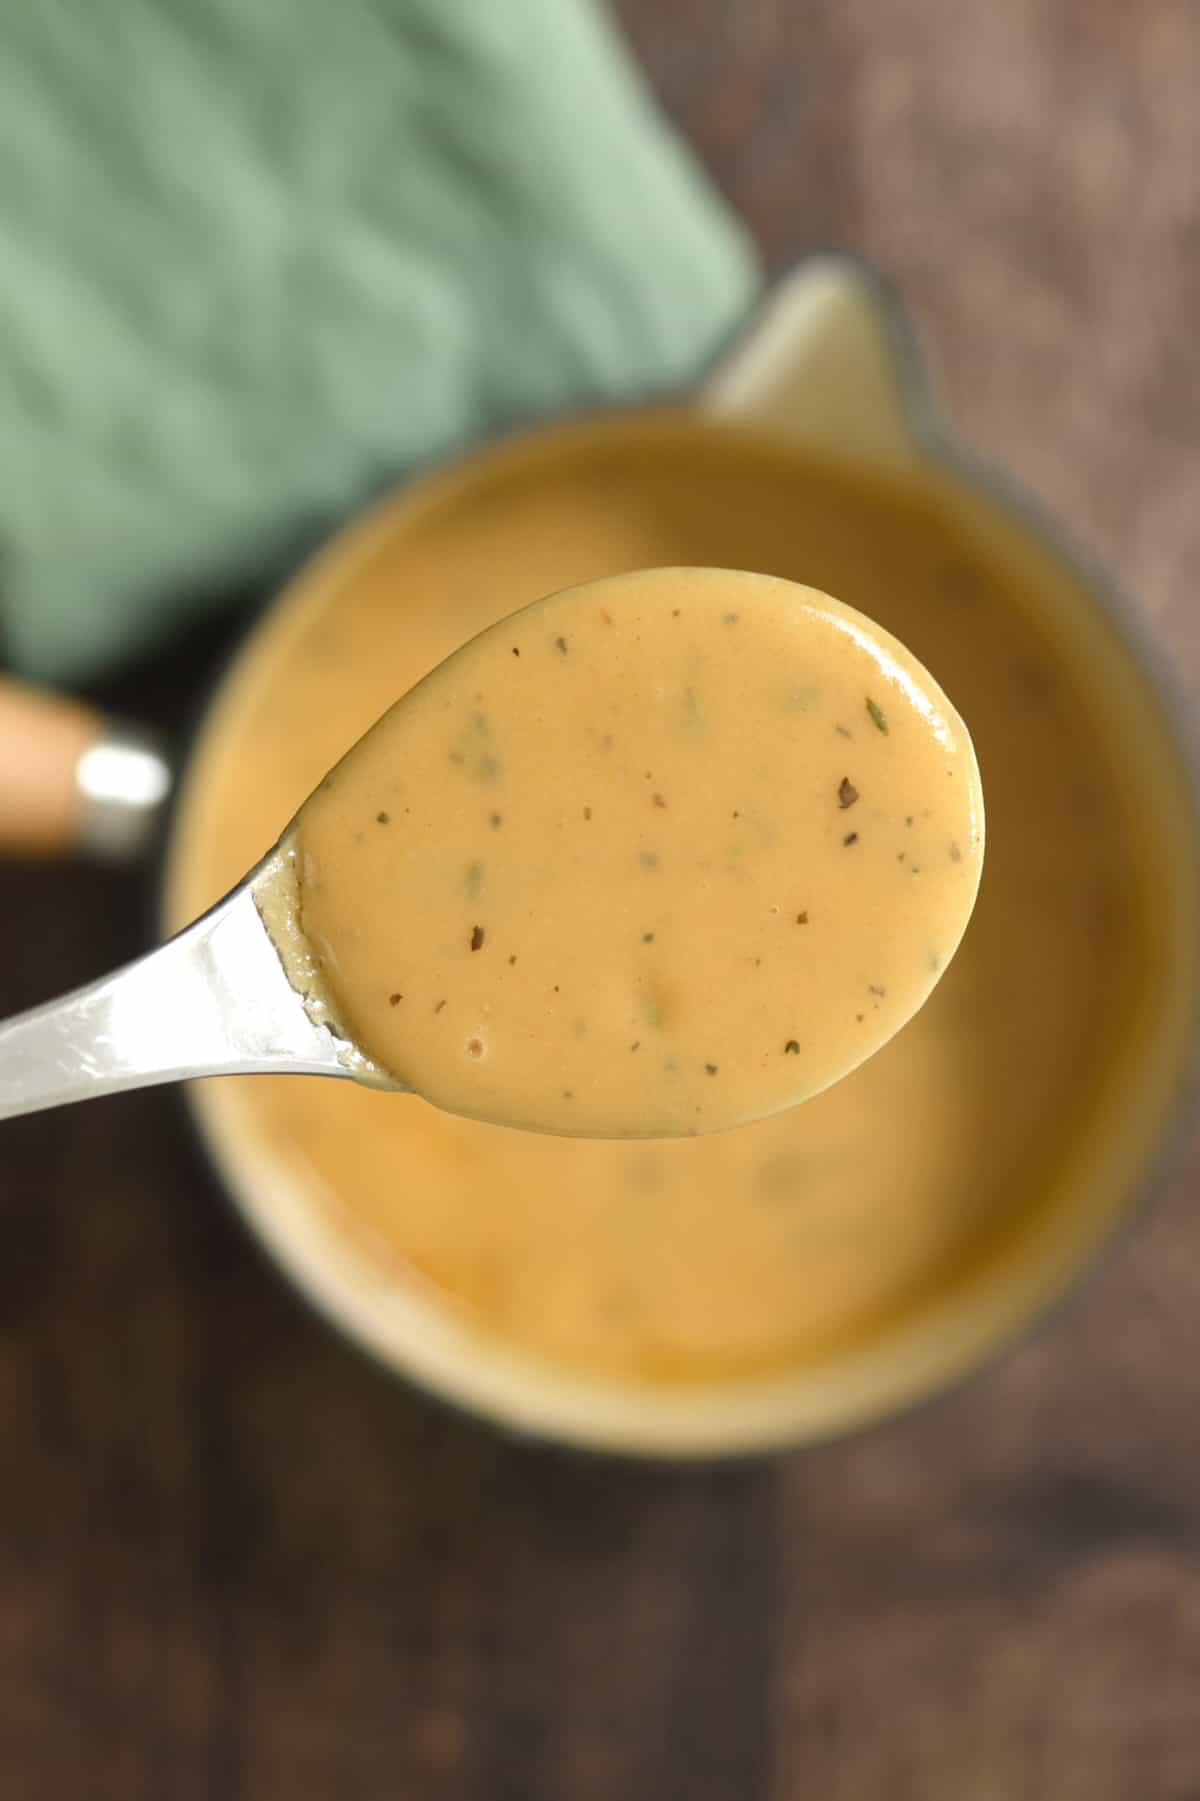 A spoonful of homemade brown chicken gravy